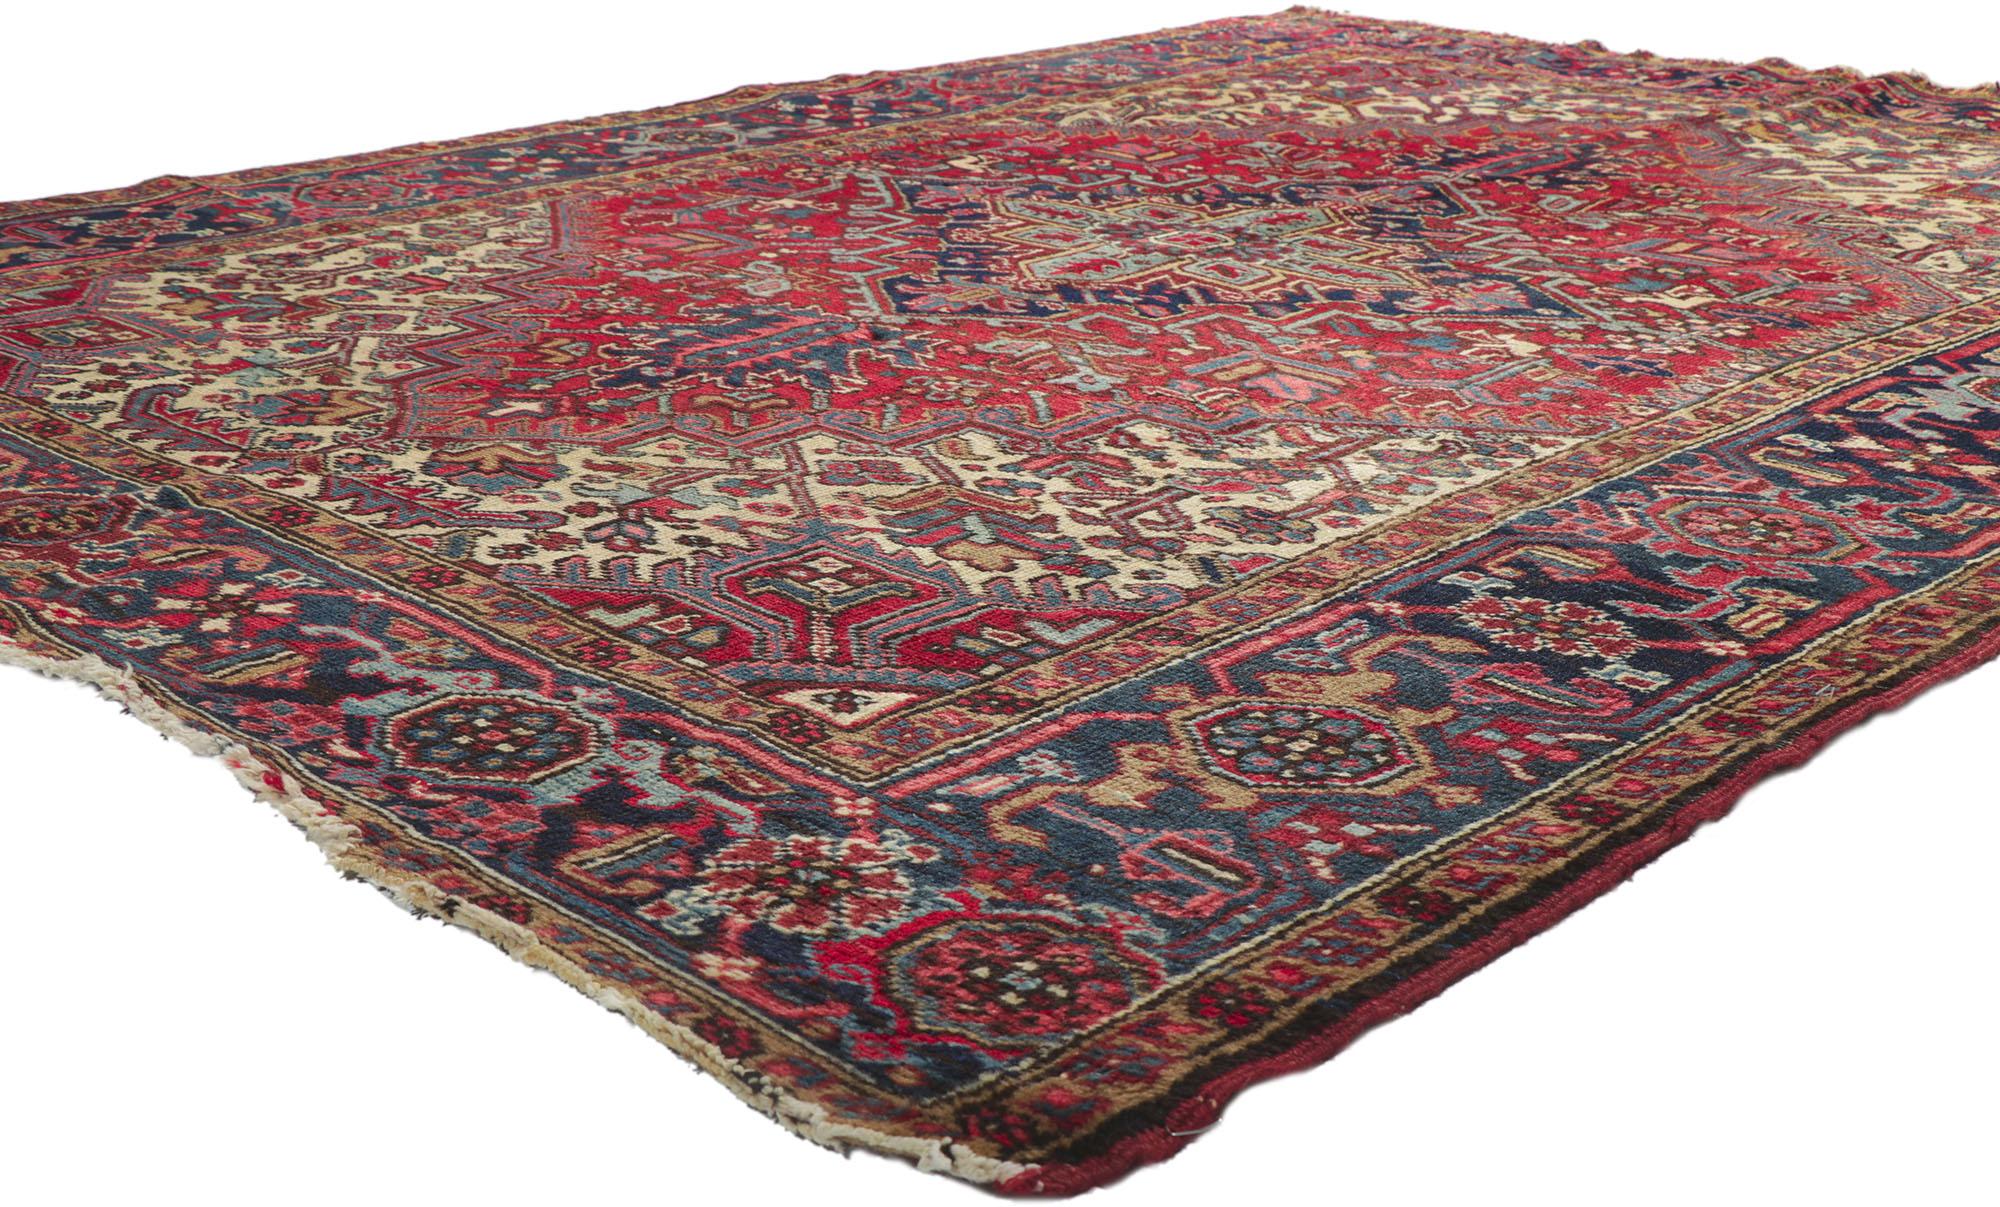 78180 Distressed Vintage Persian Heriz rug, 06'09 x 08'10. With timeless appeal, refined colors, and architectural design elements, this hand knotted wool distressed vintage Persian Heriz rug can beautifully blend modern, contemporary, and